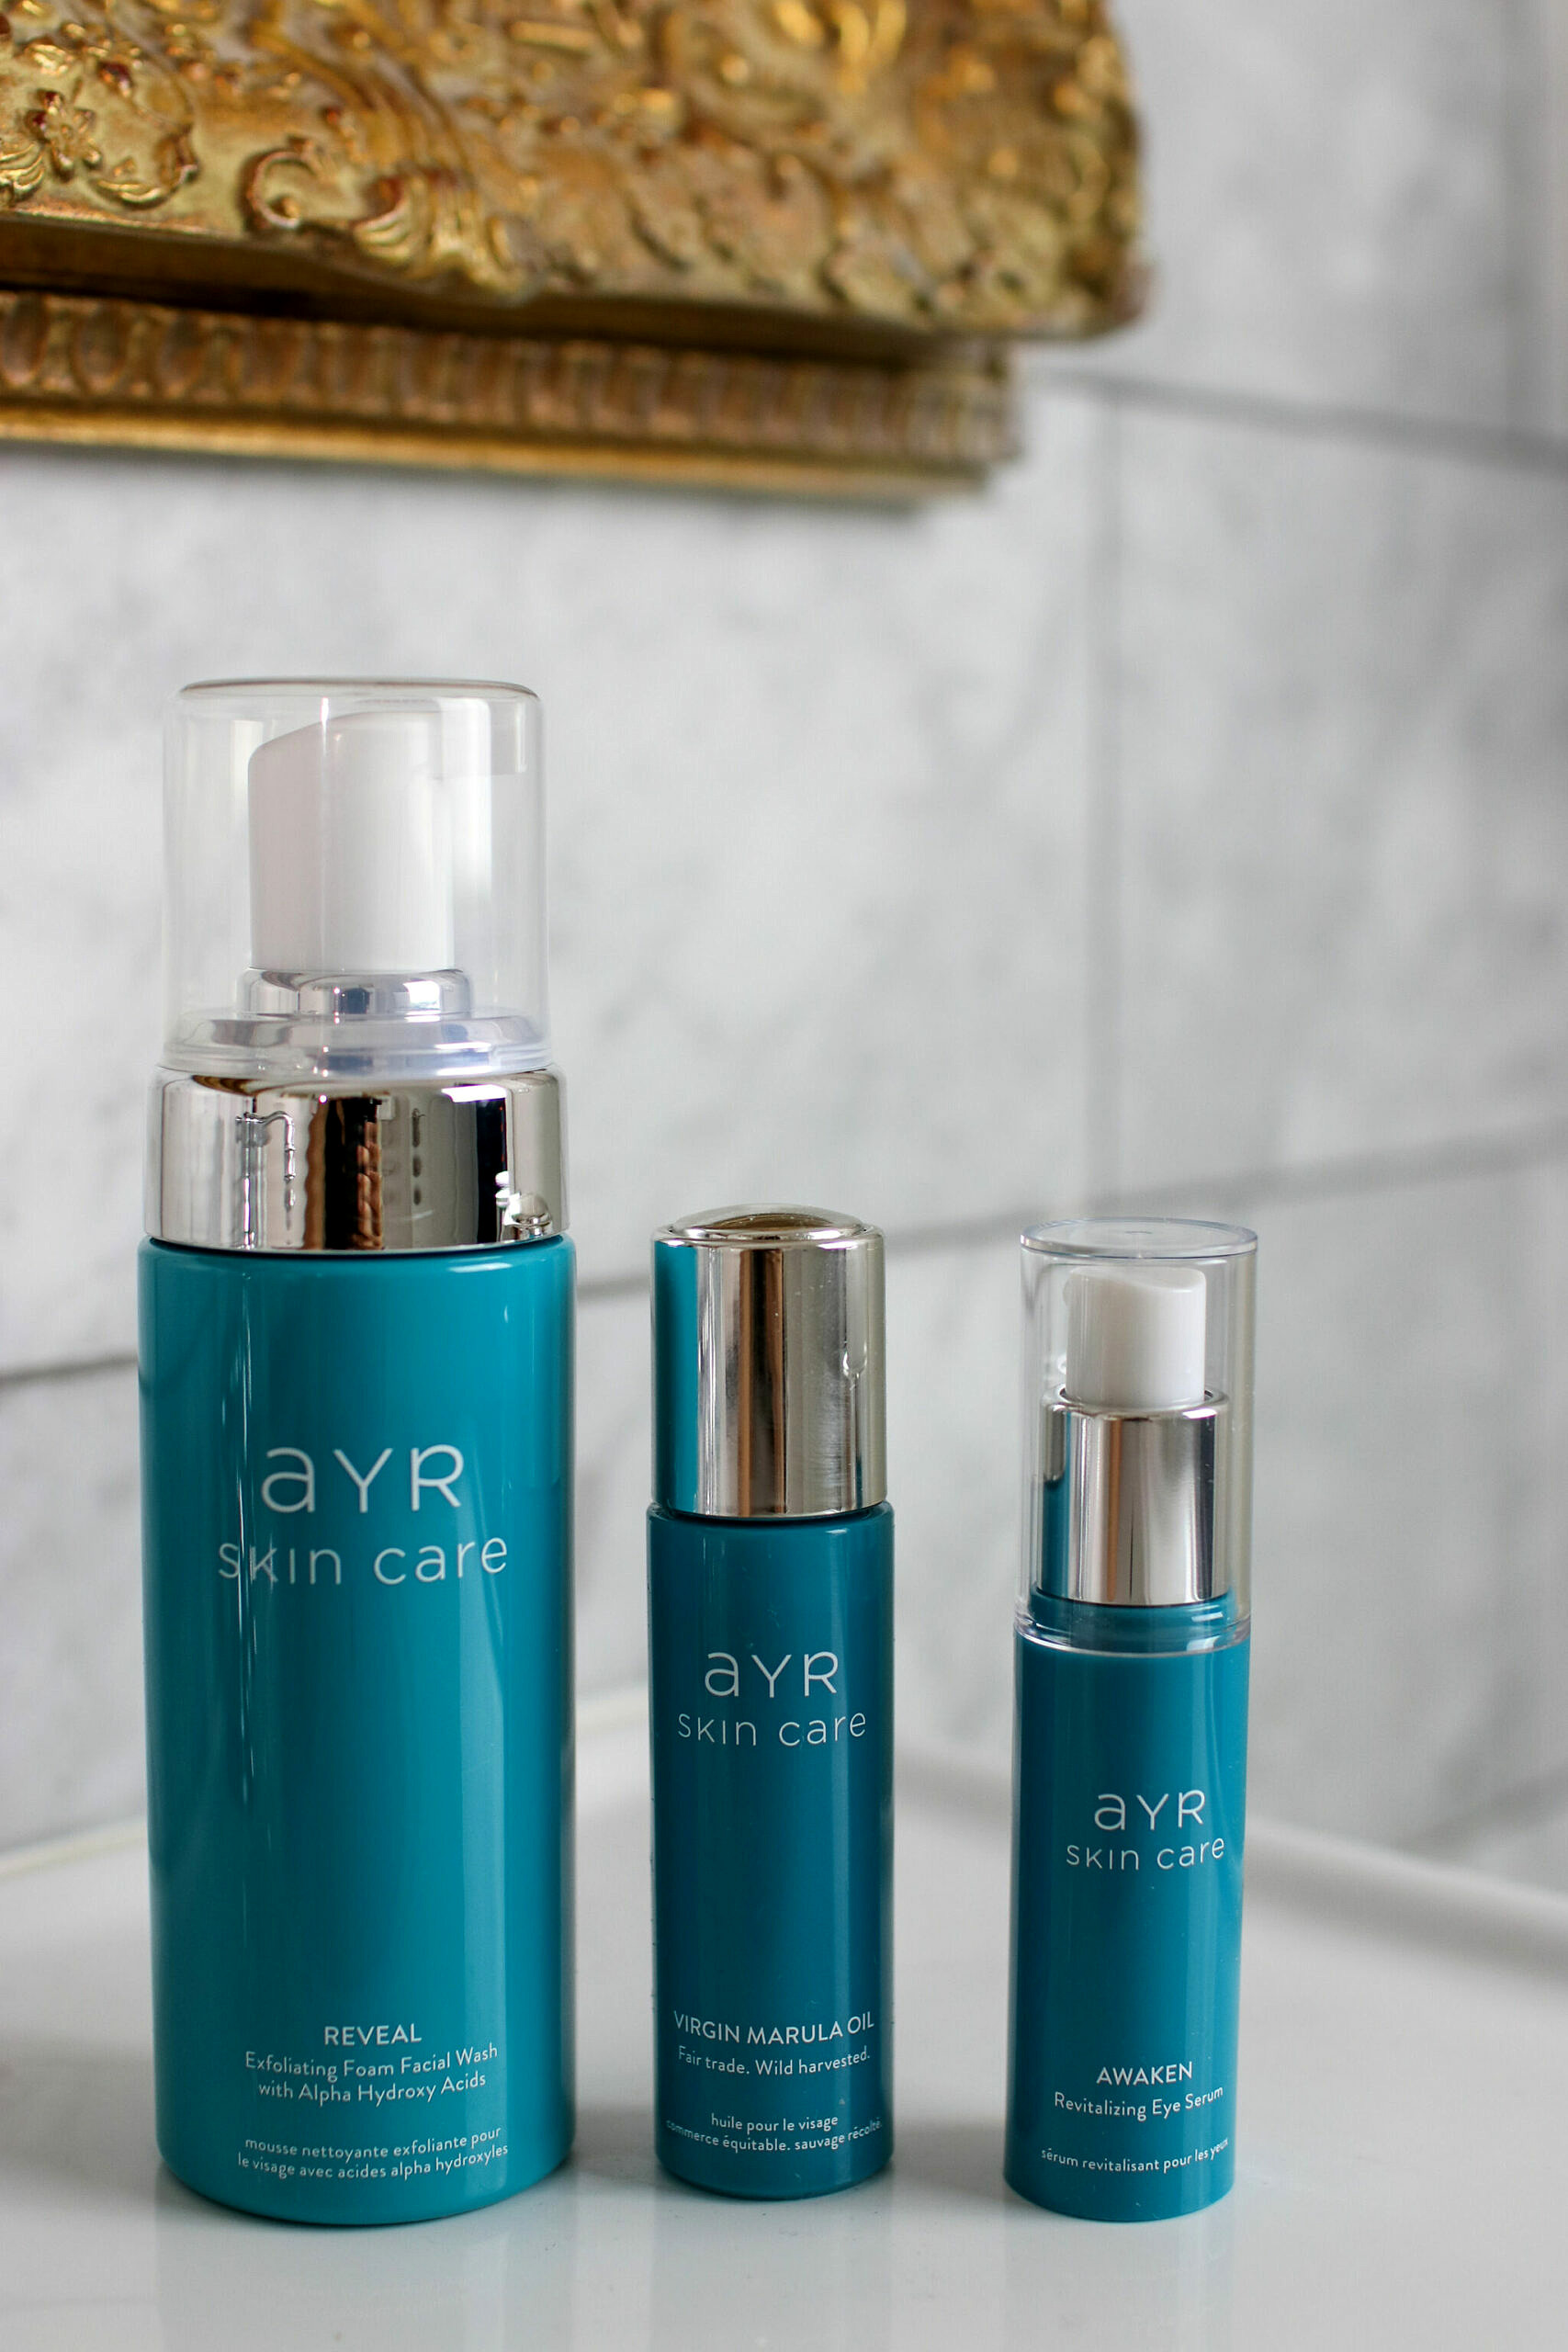 AYR Skincare Products | Organic and Carefully Sourced Natural Ingredients